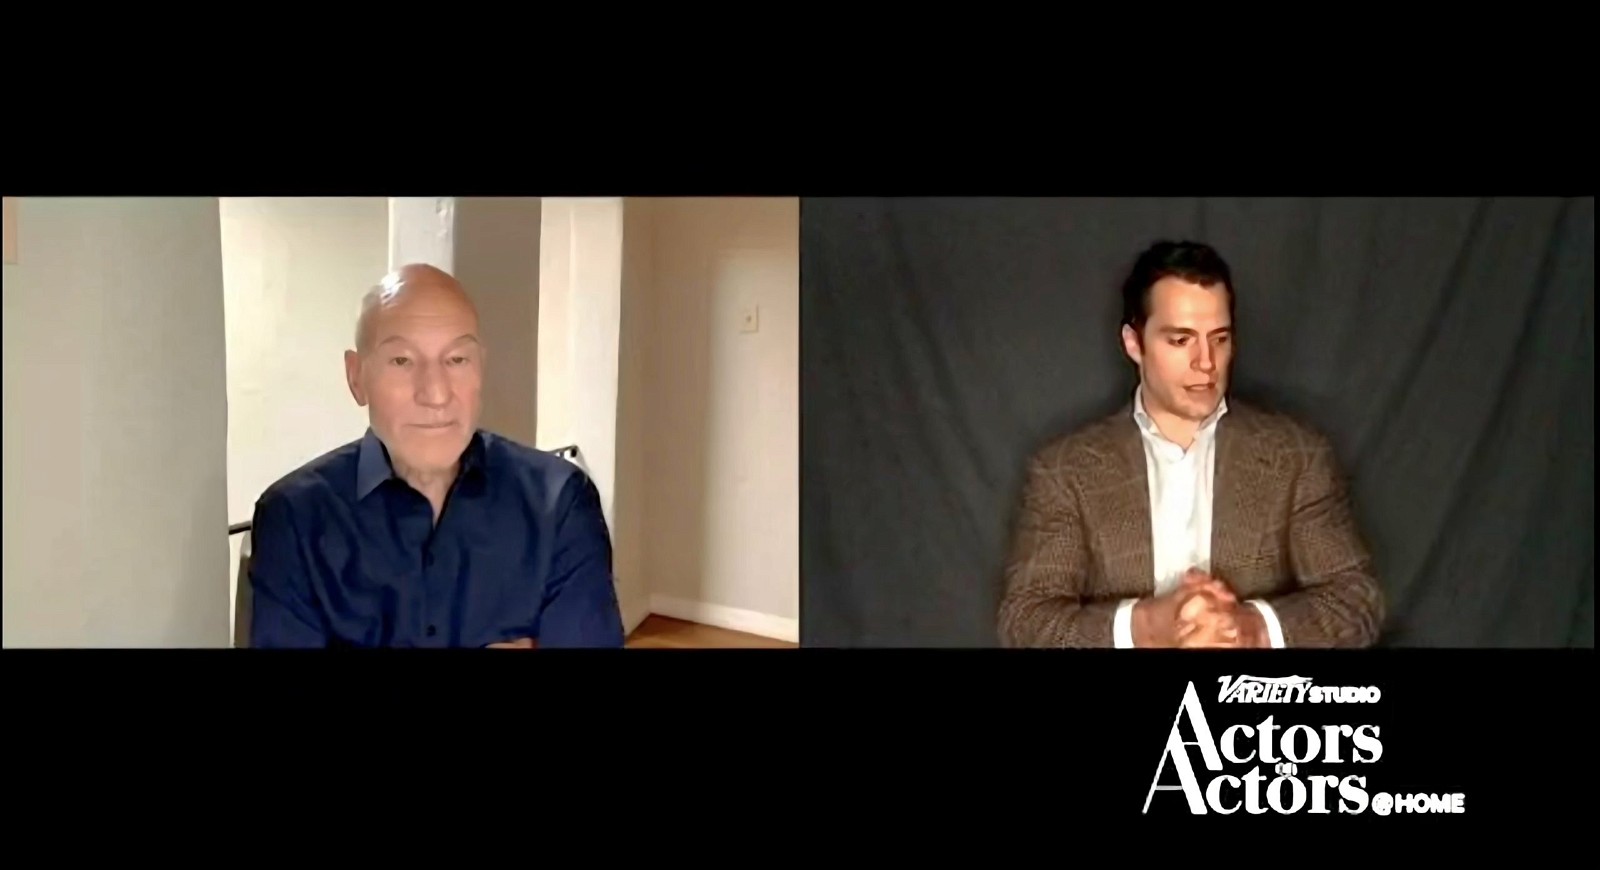 Patrick Stewart and Henry Cavill during an interview with Variety